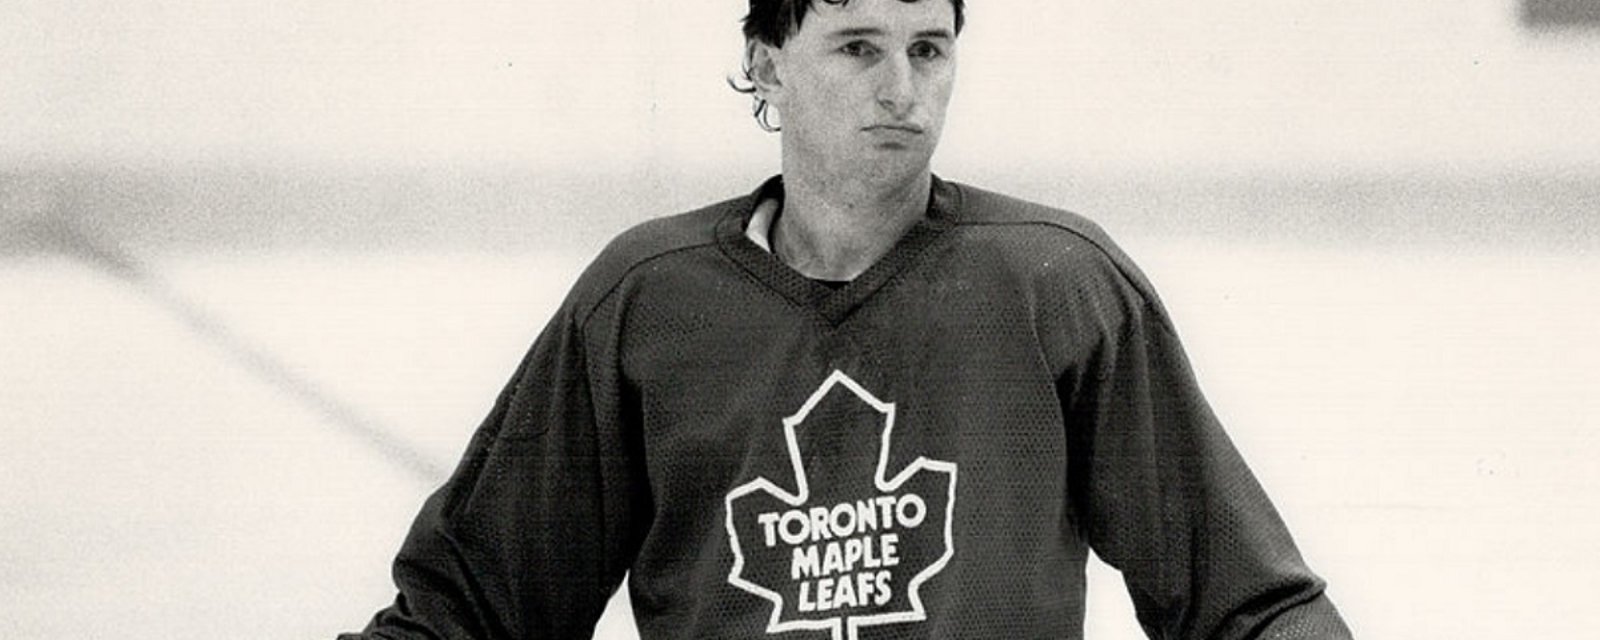 Long time former Maple Leaf dies at just 58 years old.